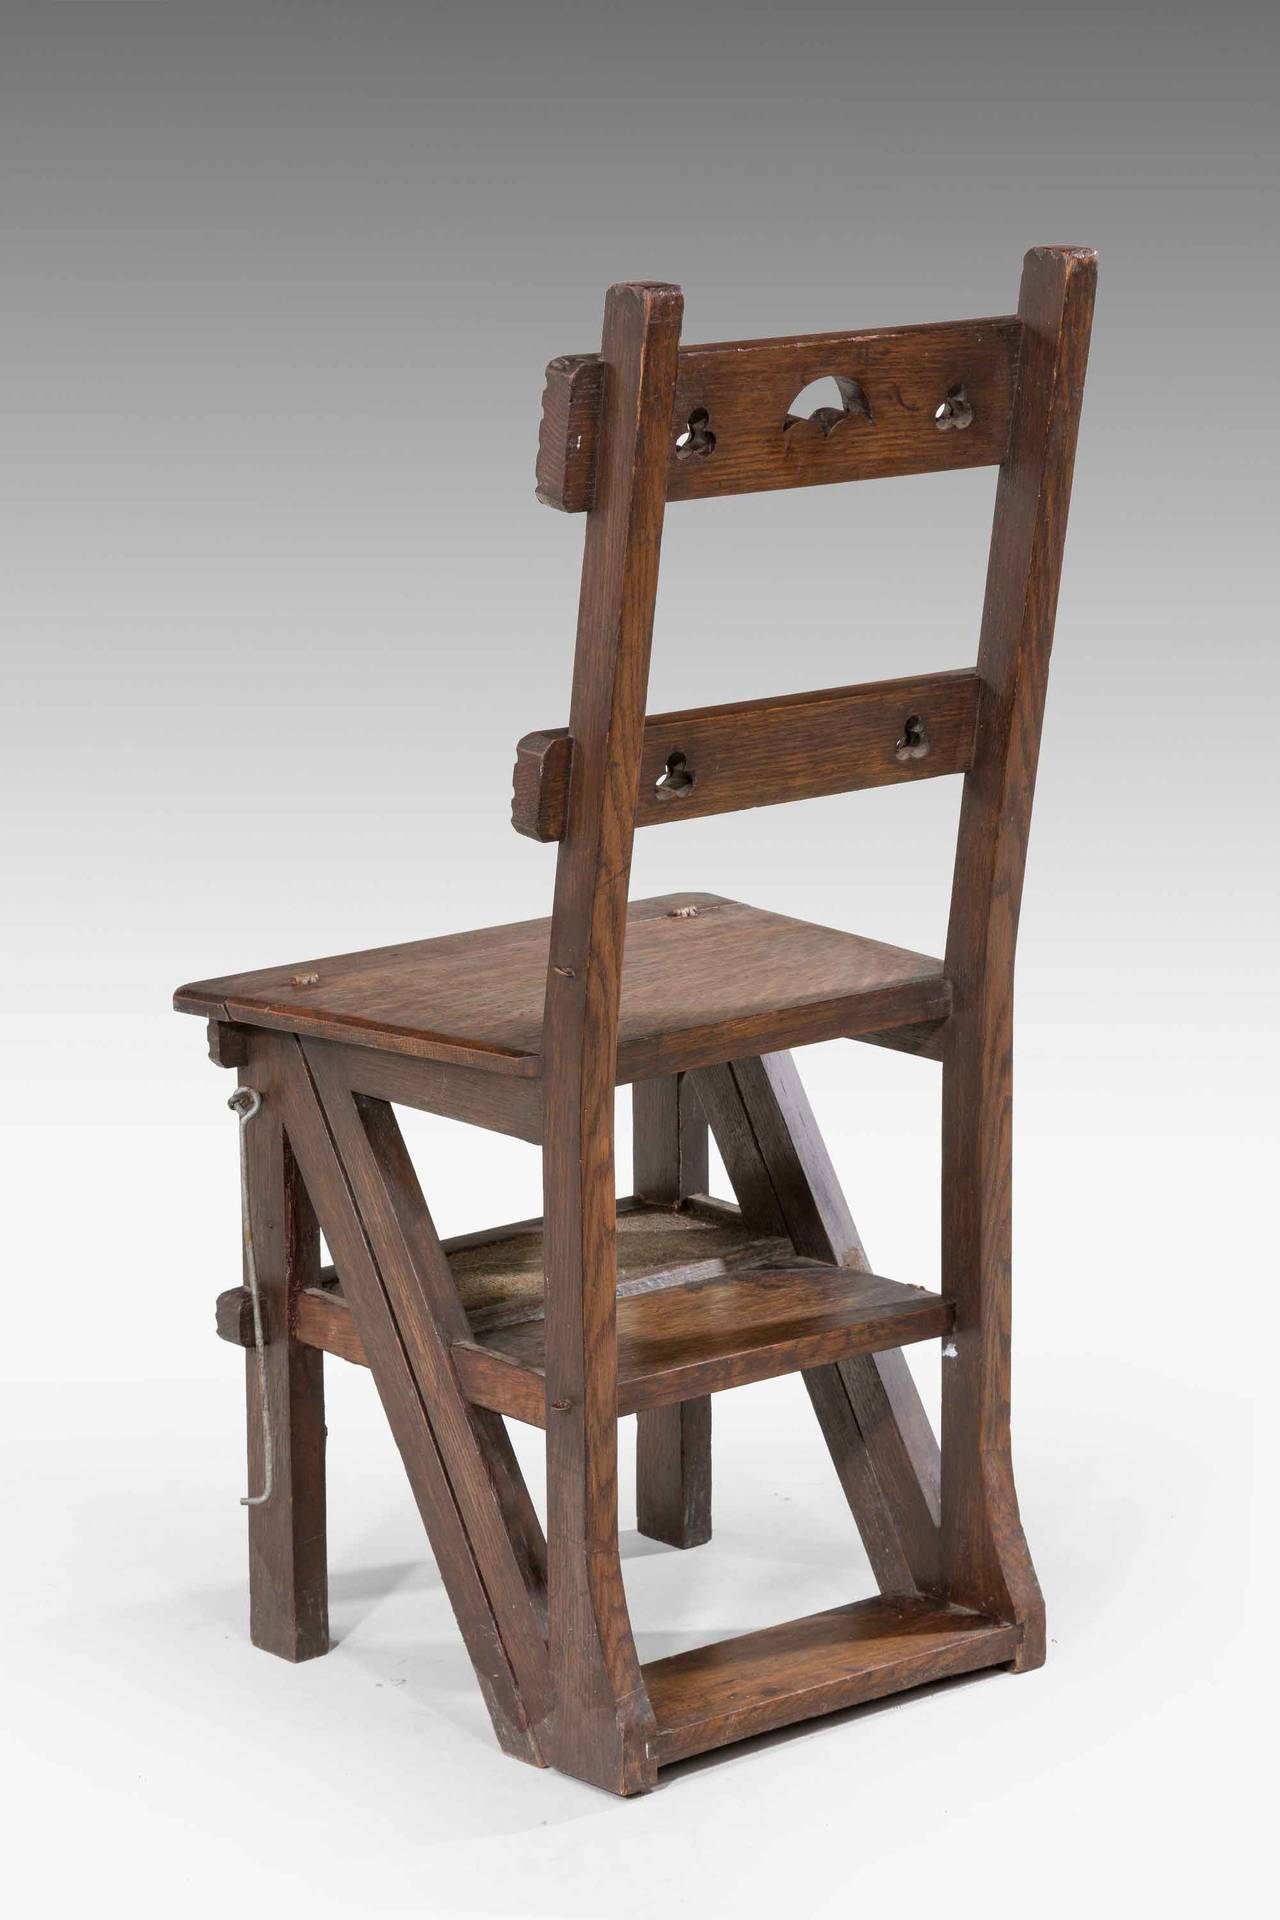 A 19th Century oak Folding Library Chair forming steps with original inset carpet sections.

RR